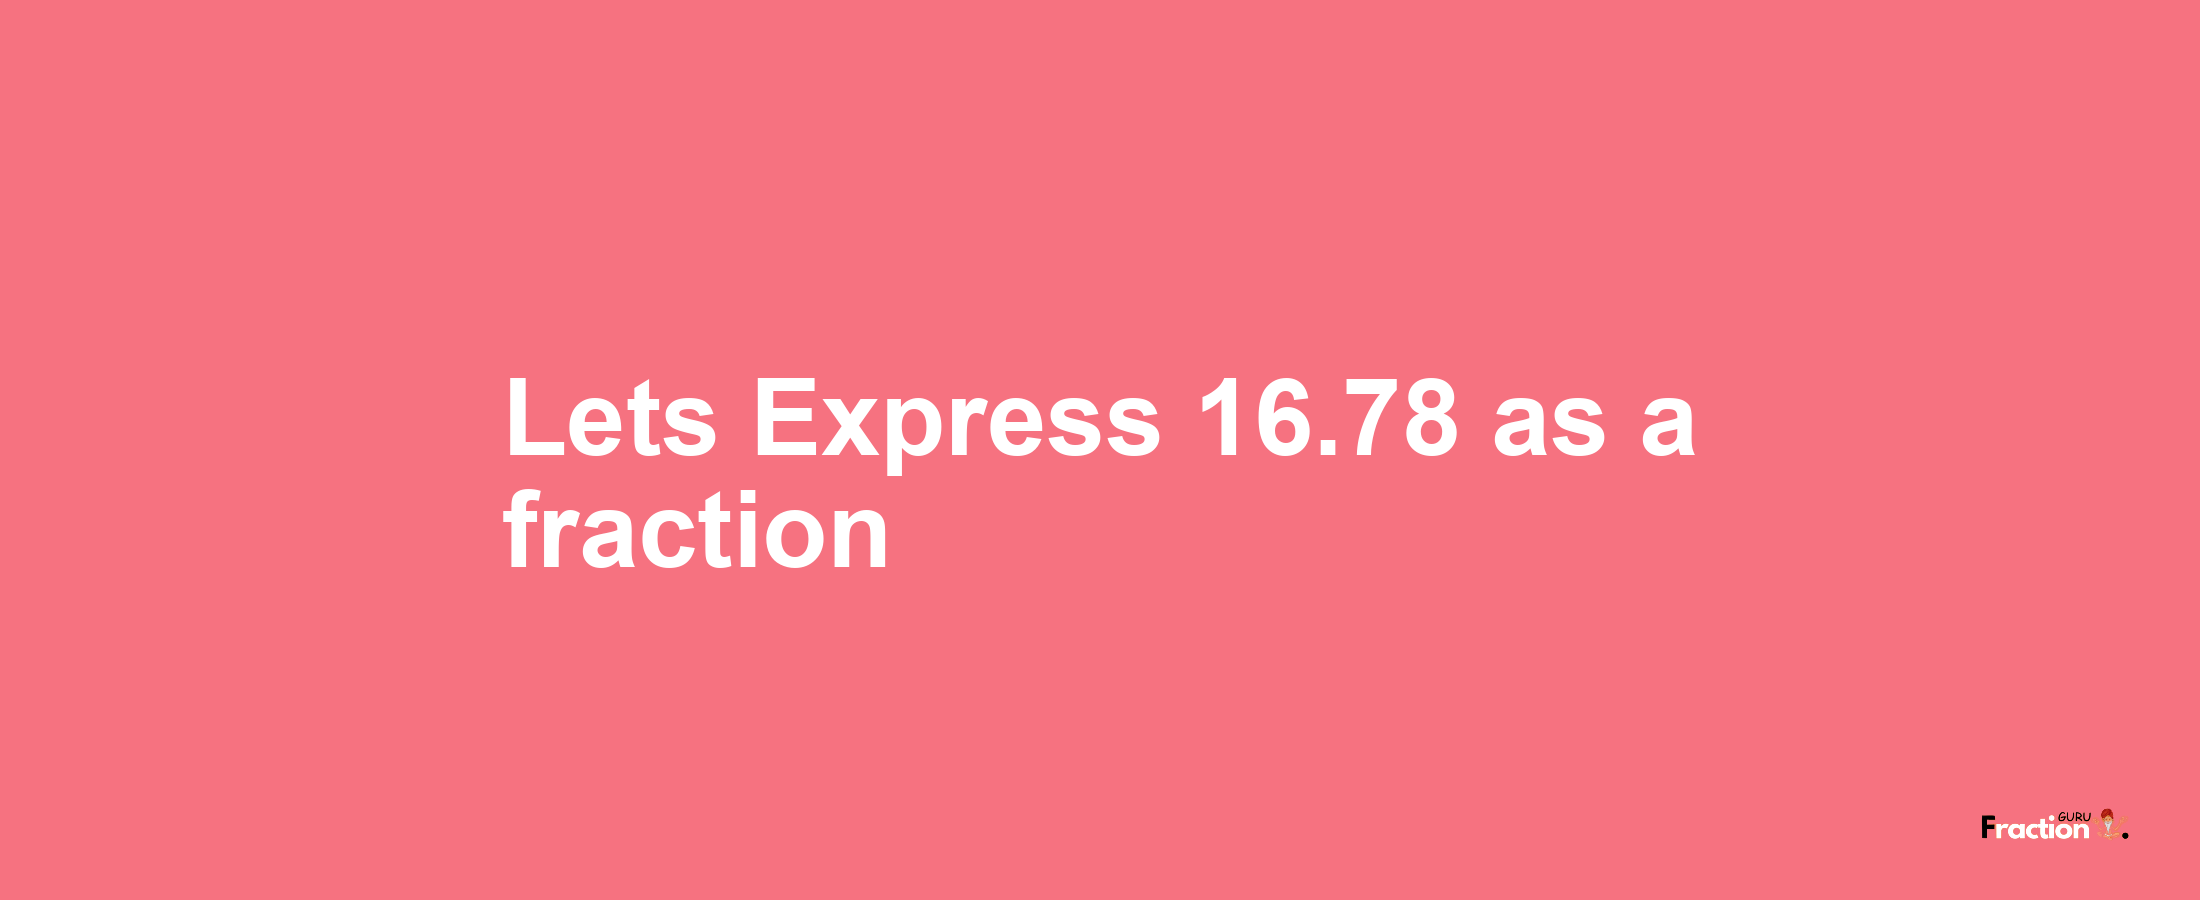 Lets Express 16.78 as afraction